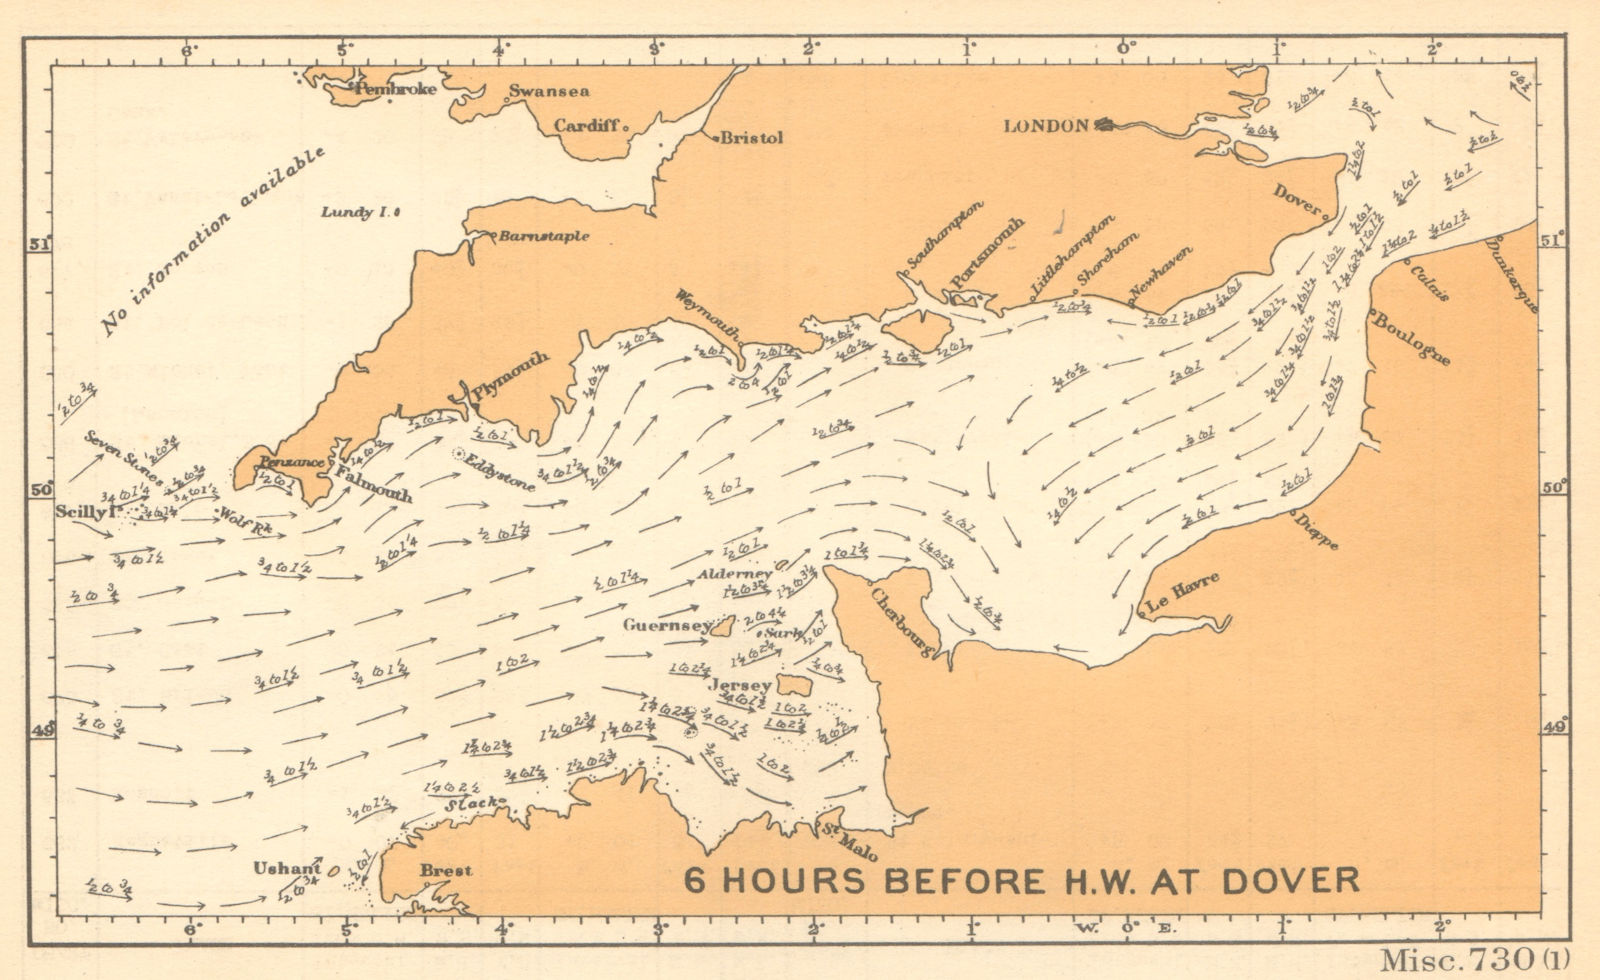 English Channel currents 6 hours before high water at Dover. ADMIRALTY 1943 map